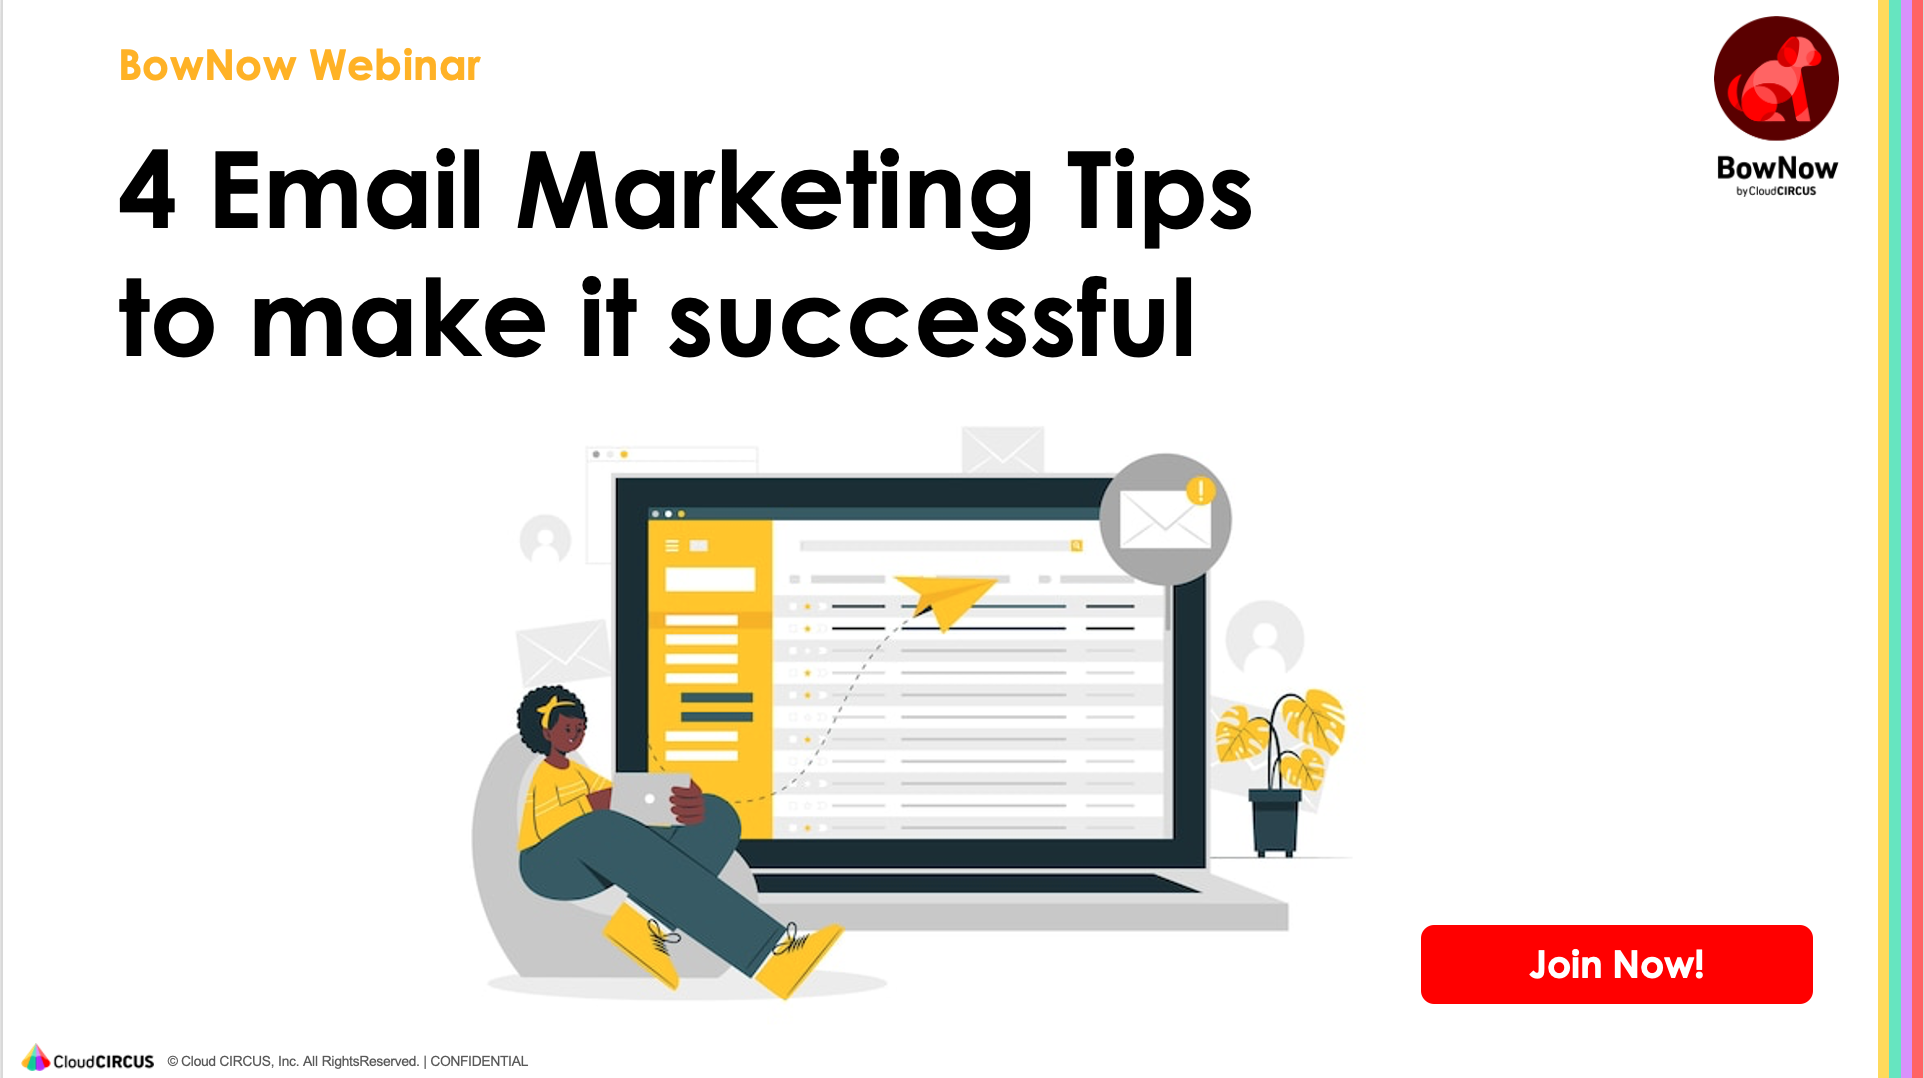 Webinar: 4 Email Marketing Tips to make it successful